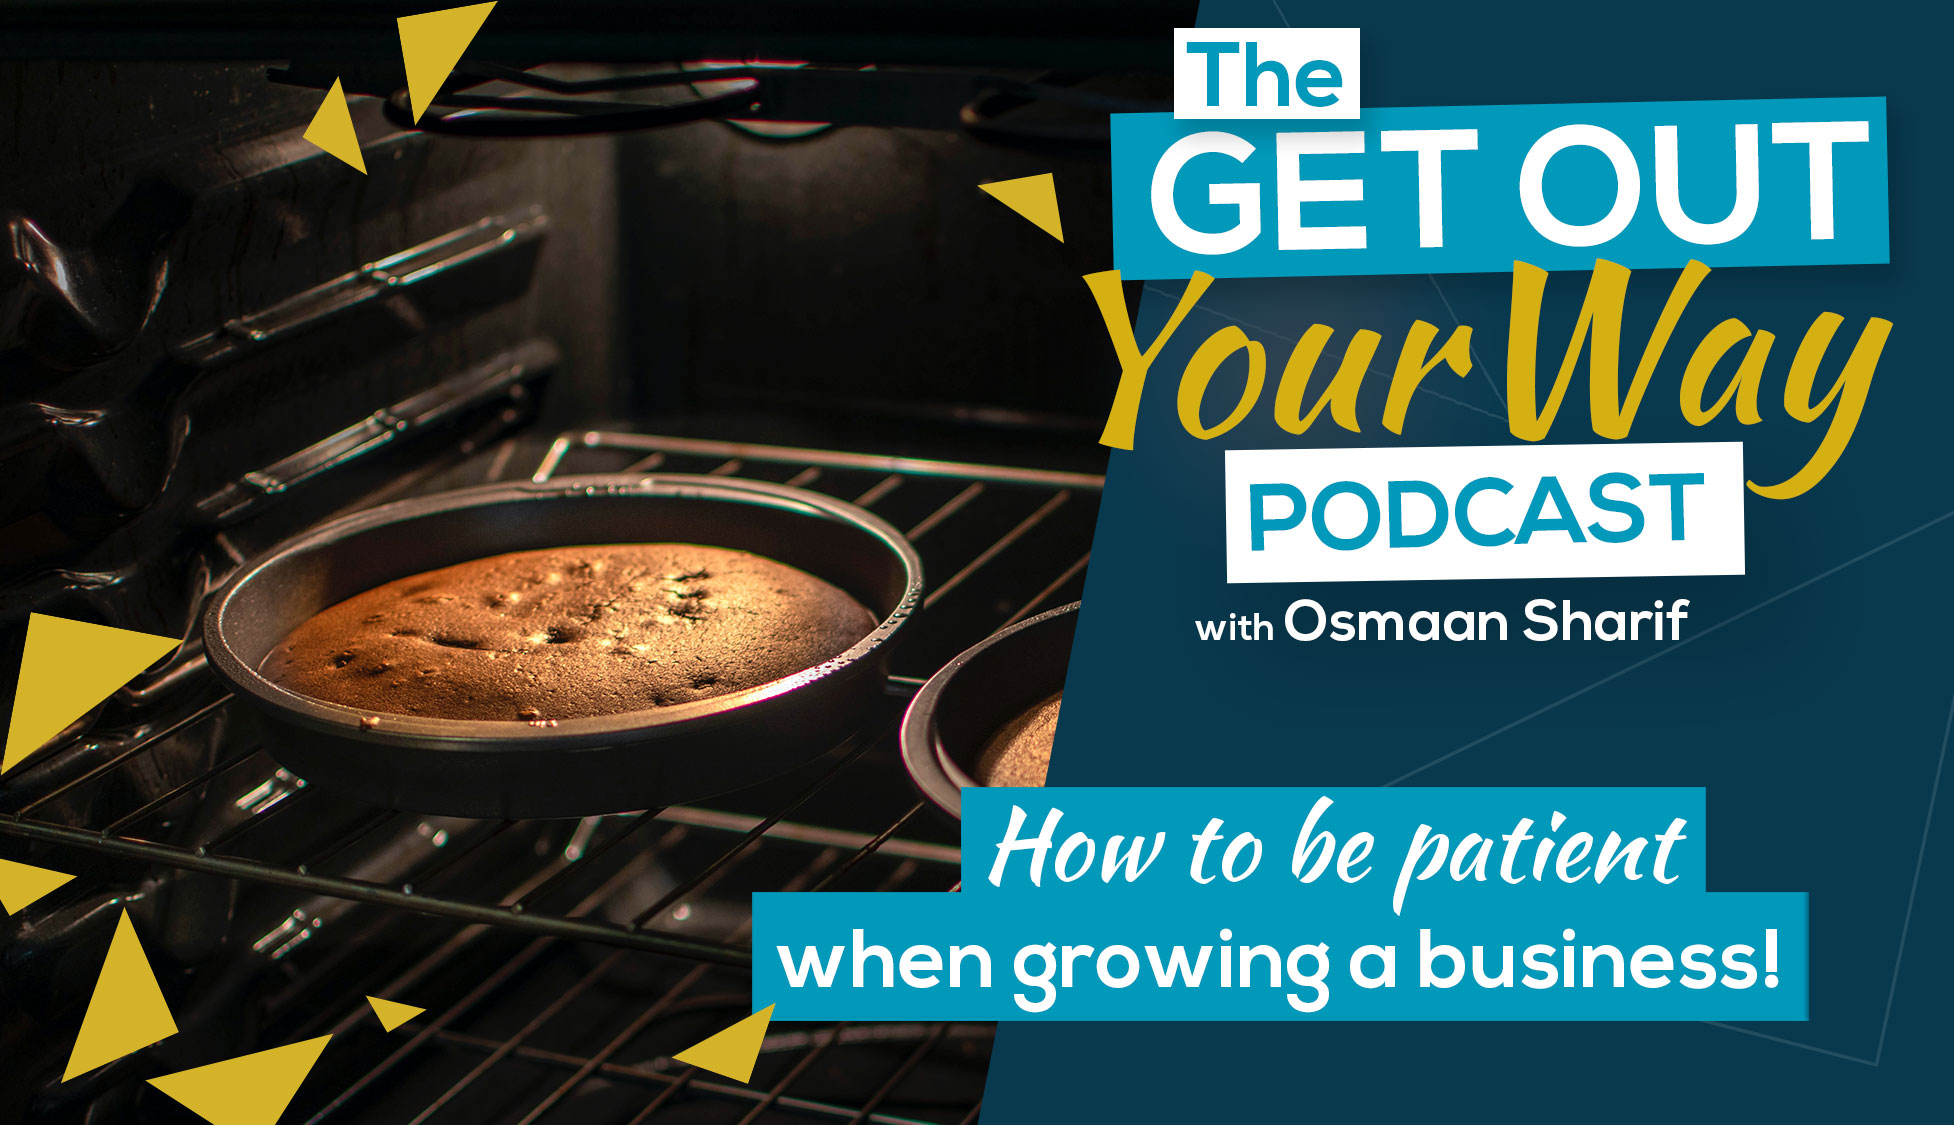 How to be patient when growing a business